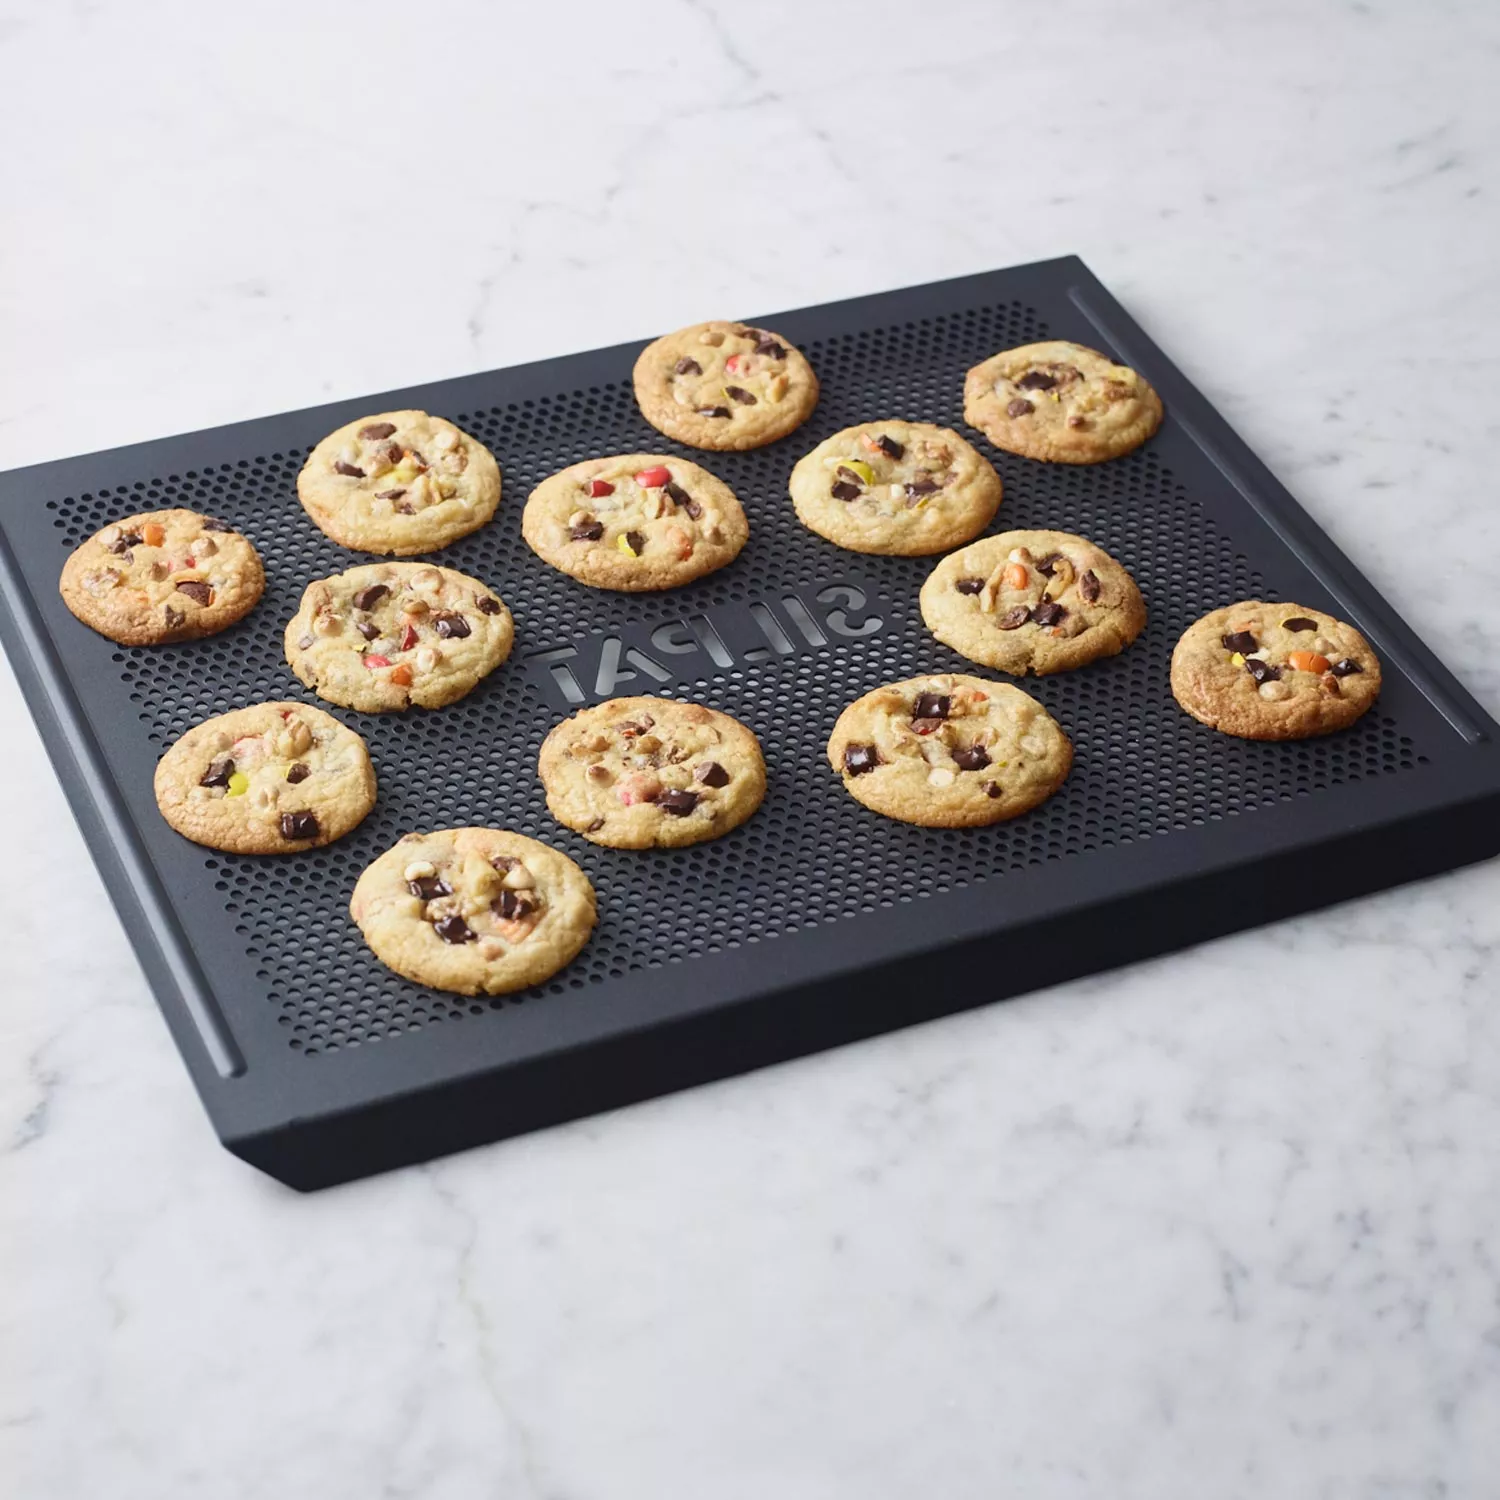 Patisse - Perforated baking sheet non-stick - Silver Top